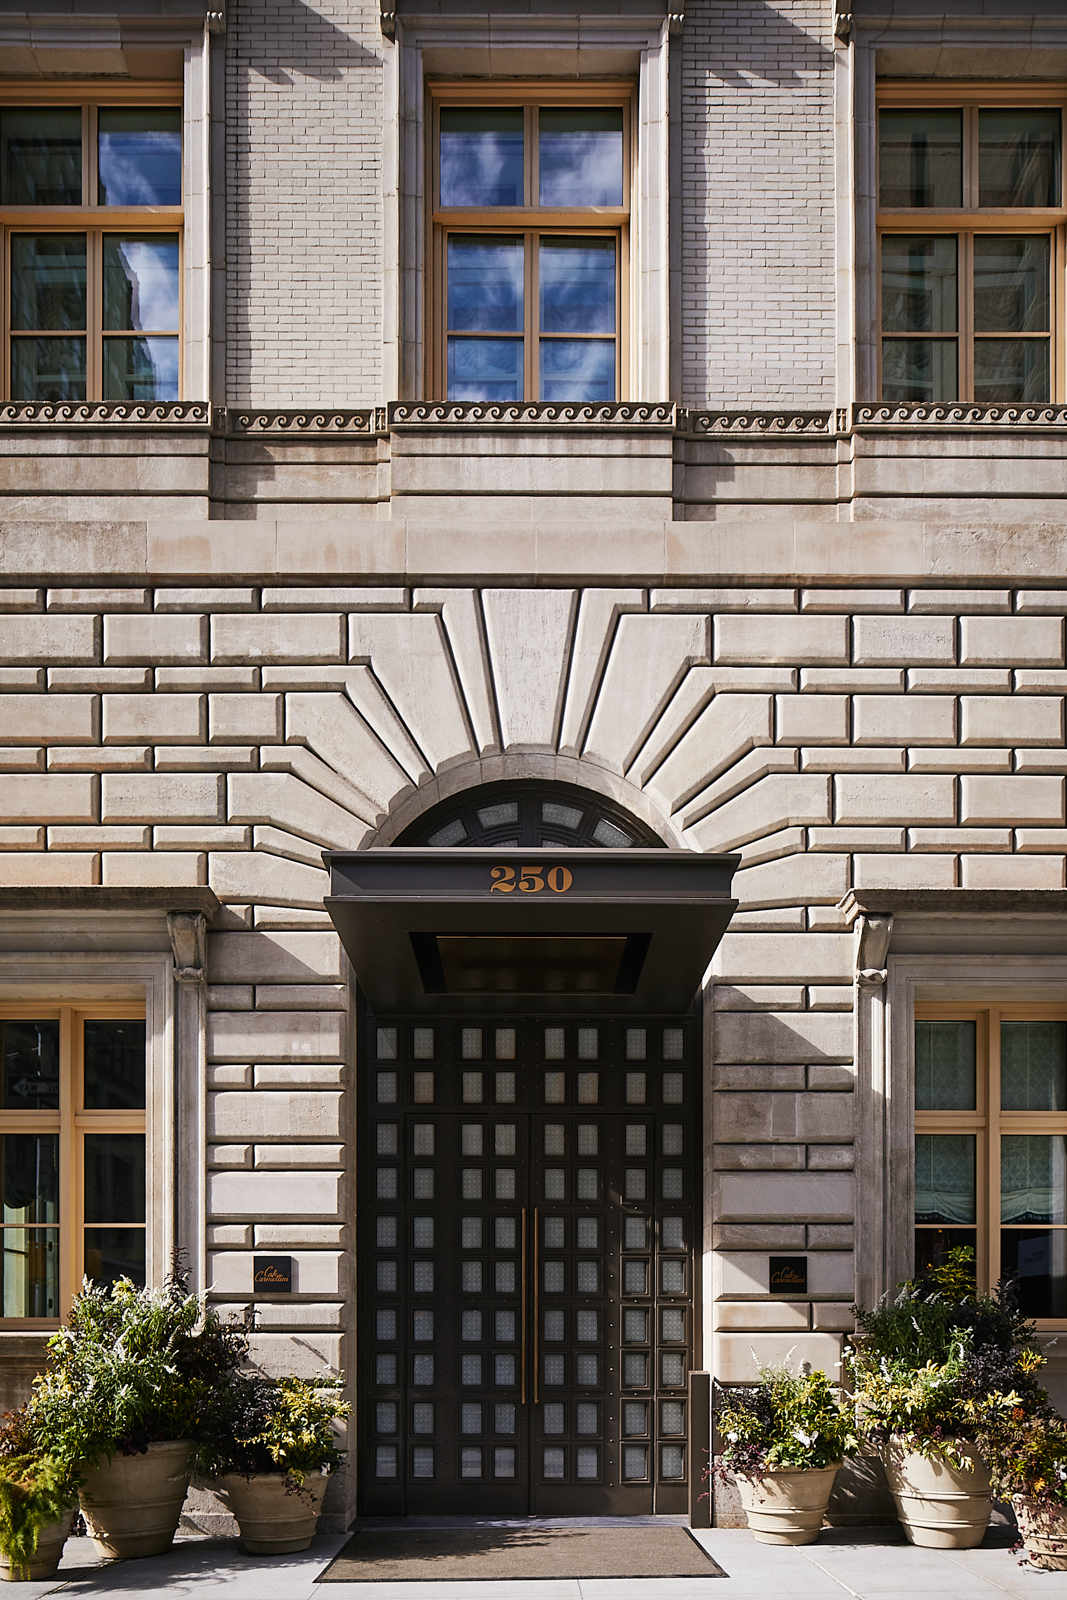 The Fifth Ave Hotel's exterior boasts an impressive architectural design.